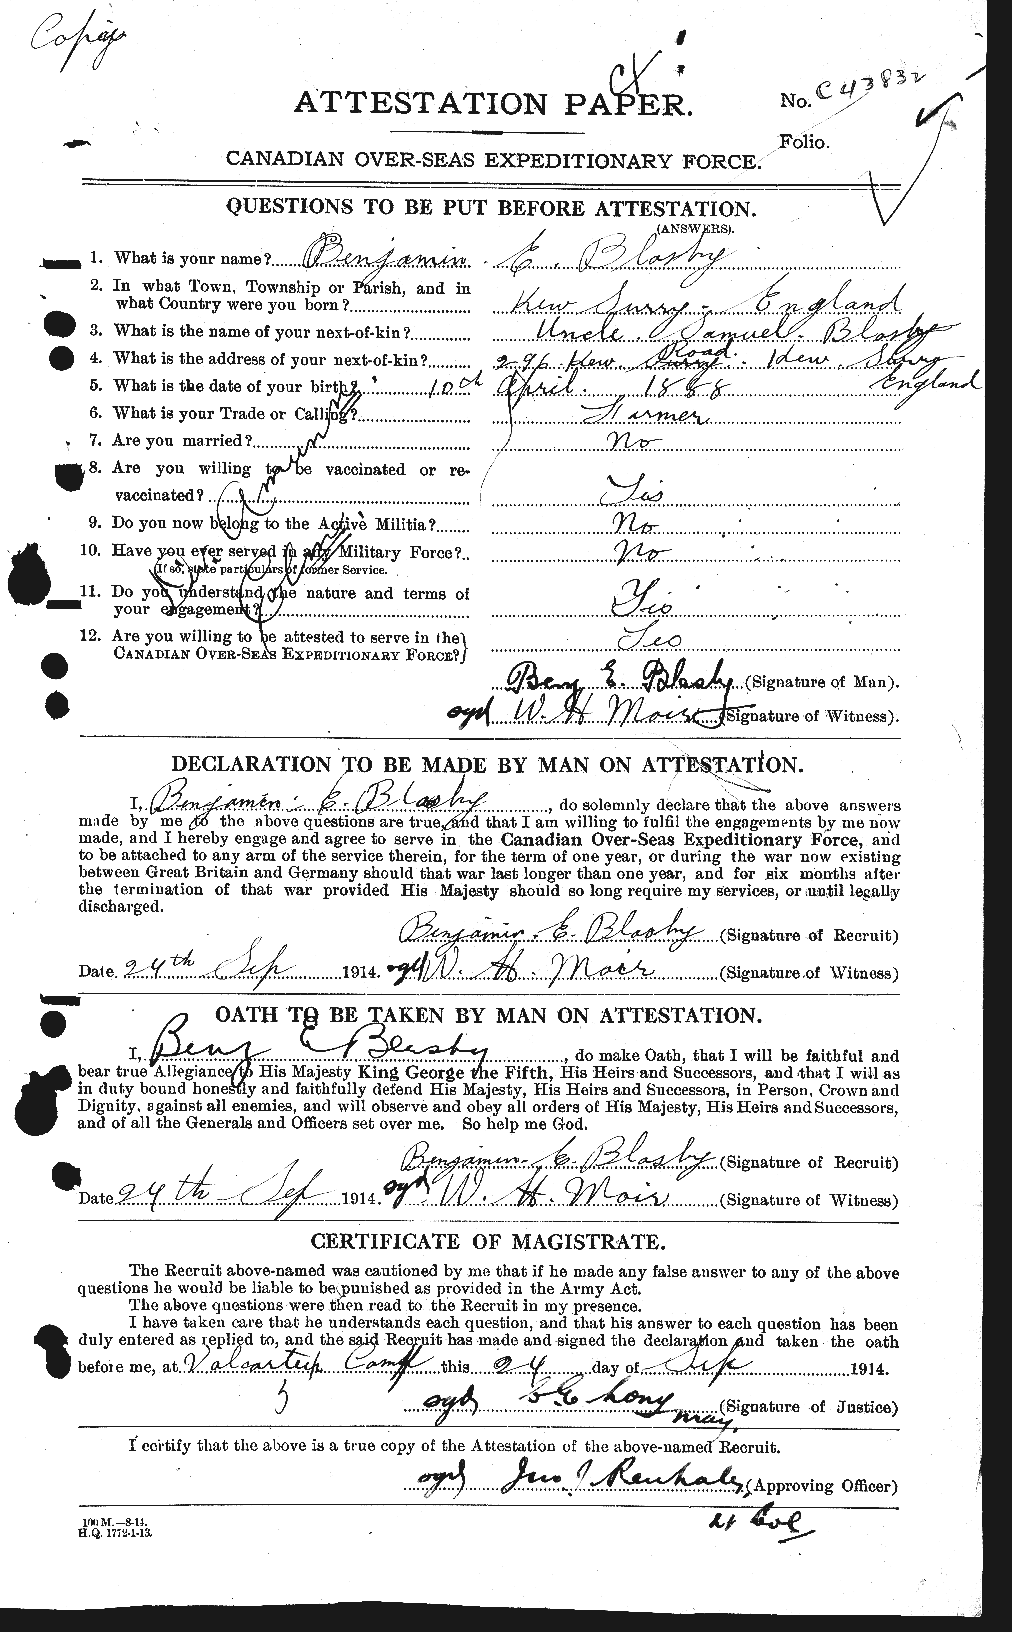 Personnel Records of the First World War - CEF 247776a